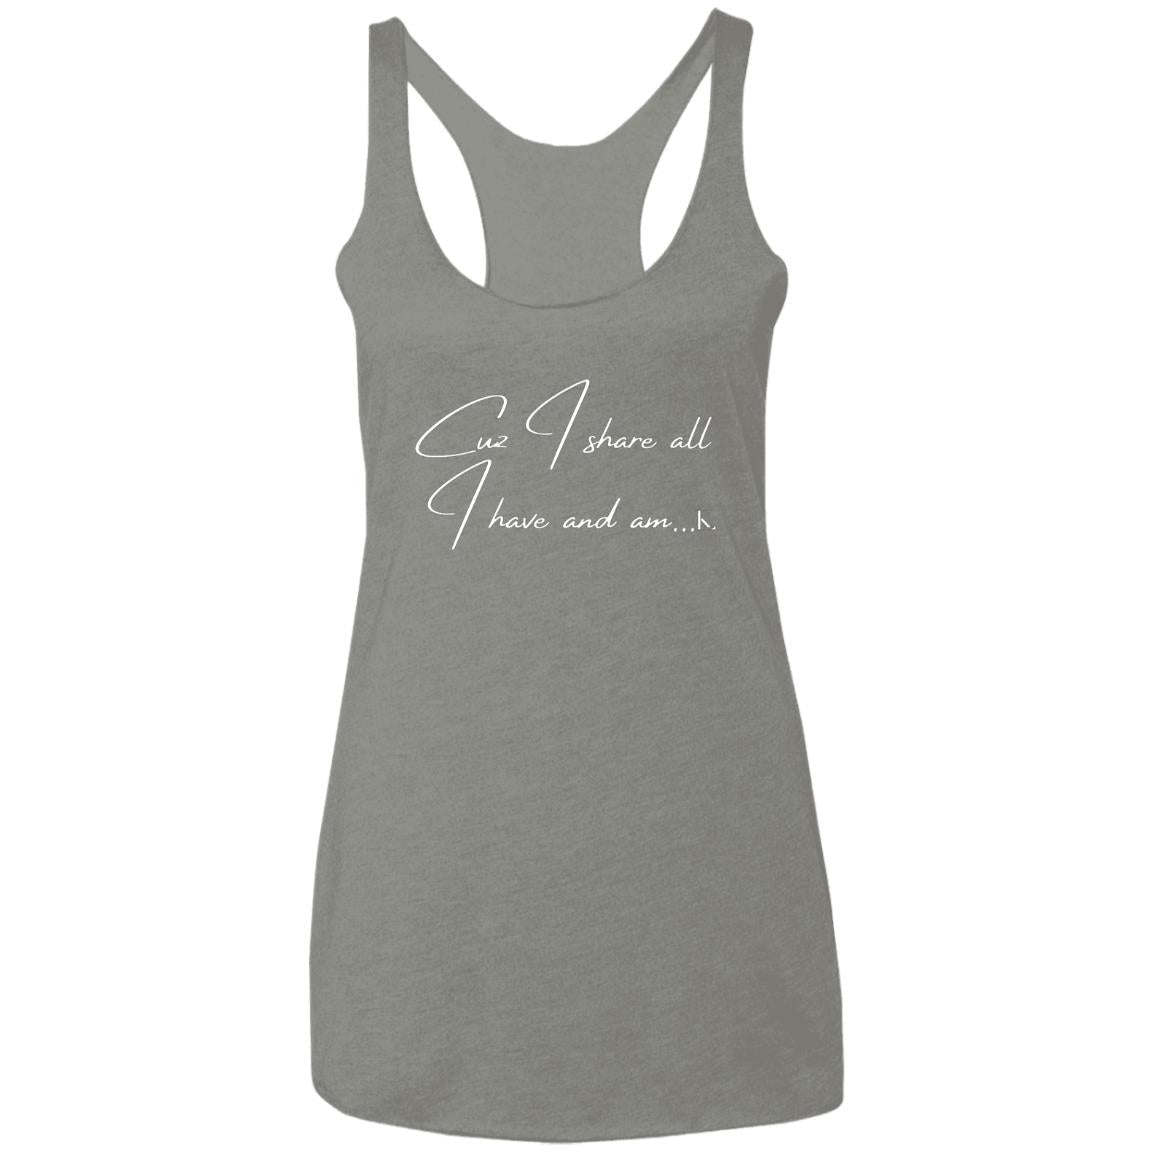 Cuz I Share All I Have And Am... Women's Racerback Tank